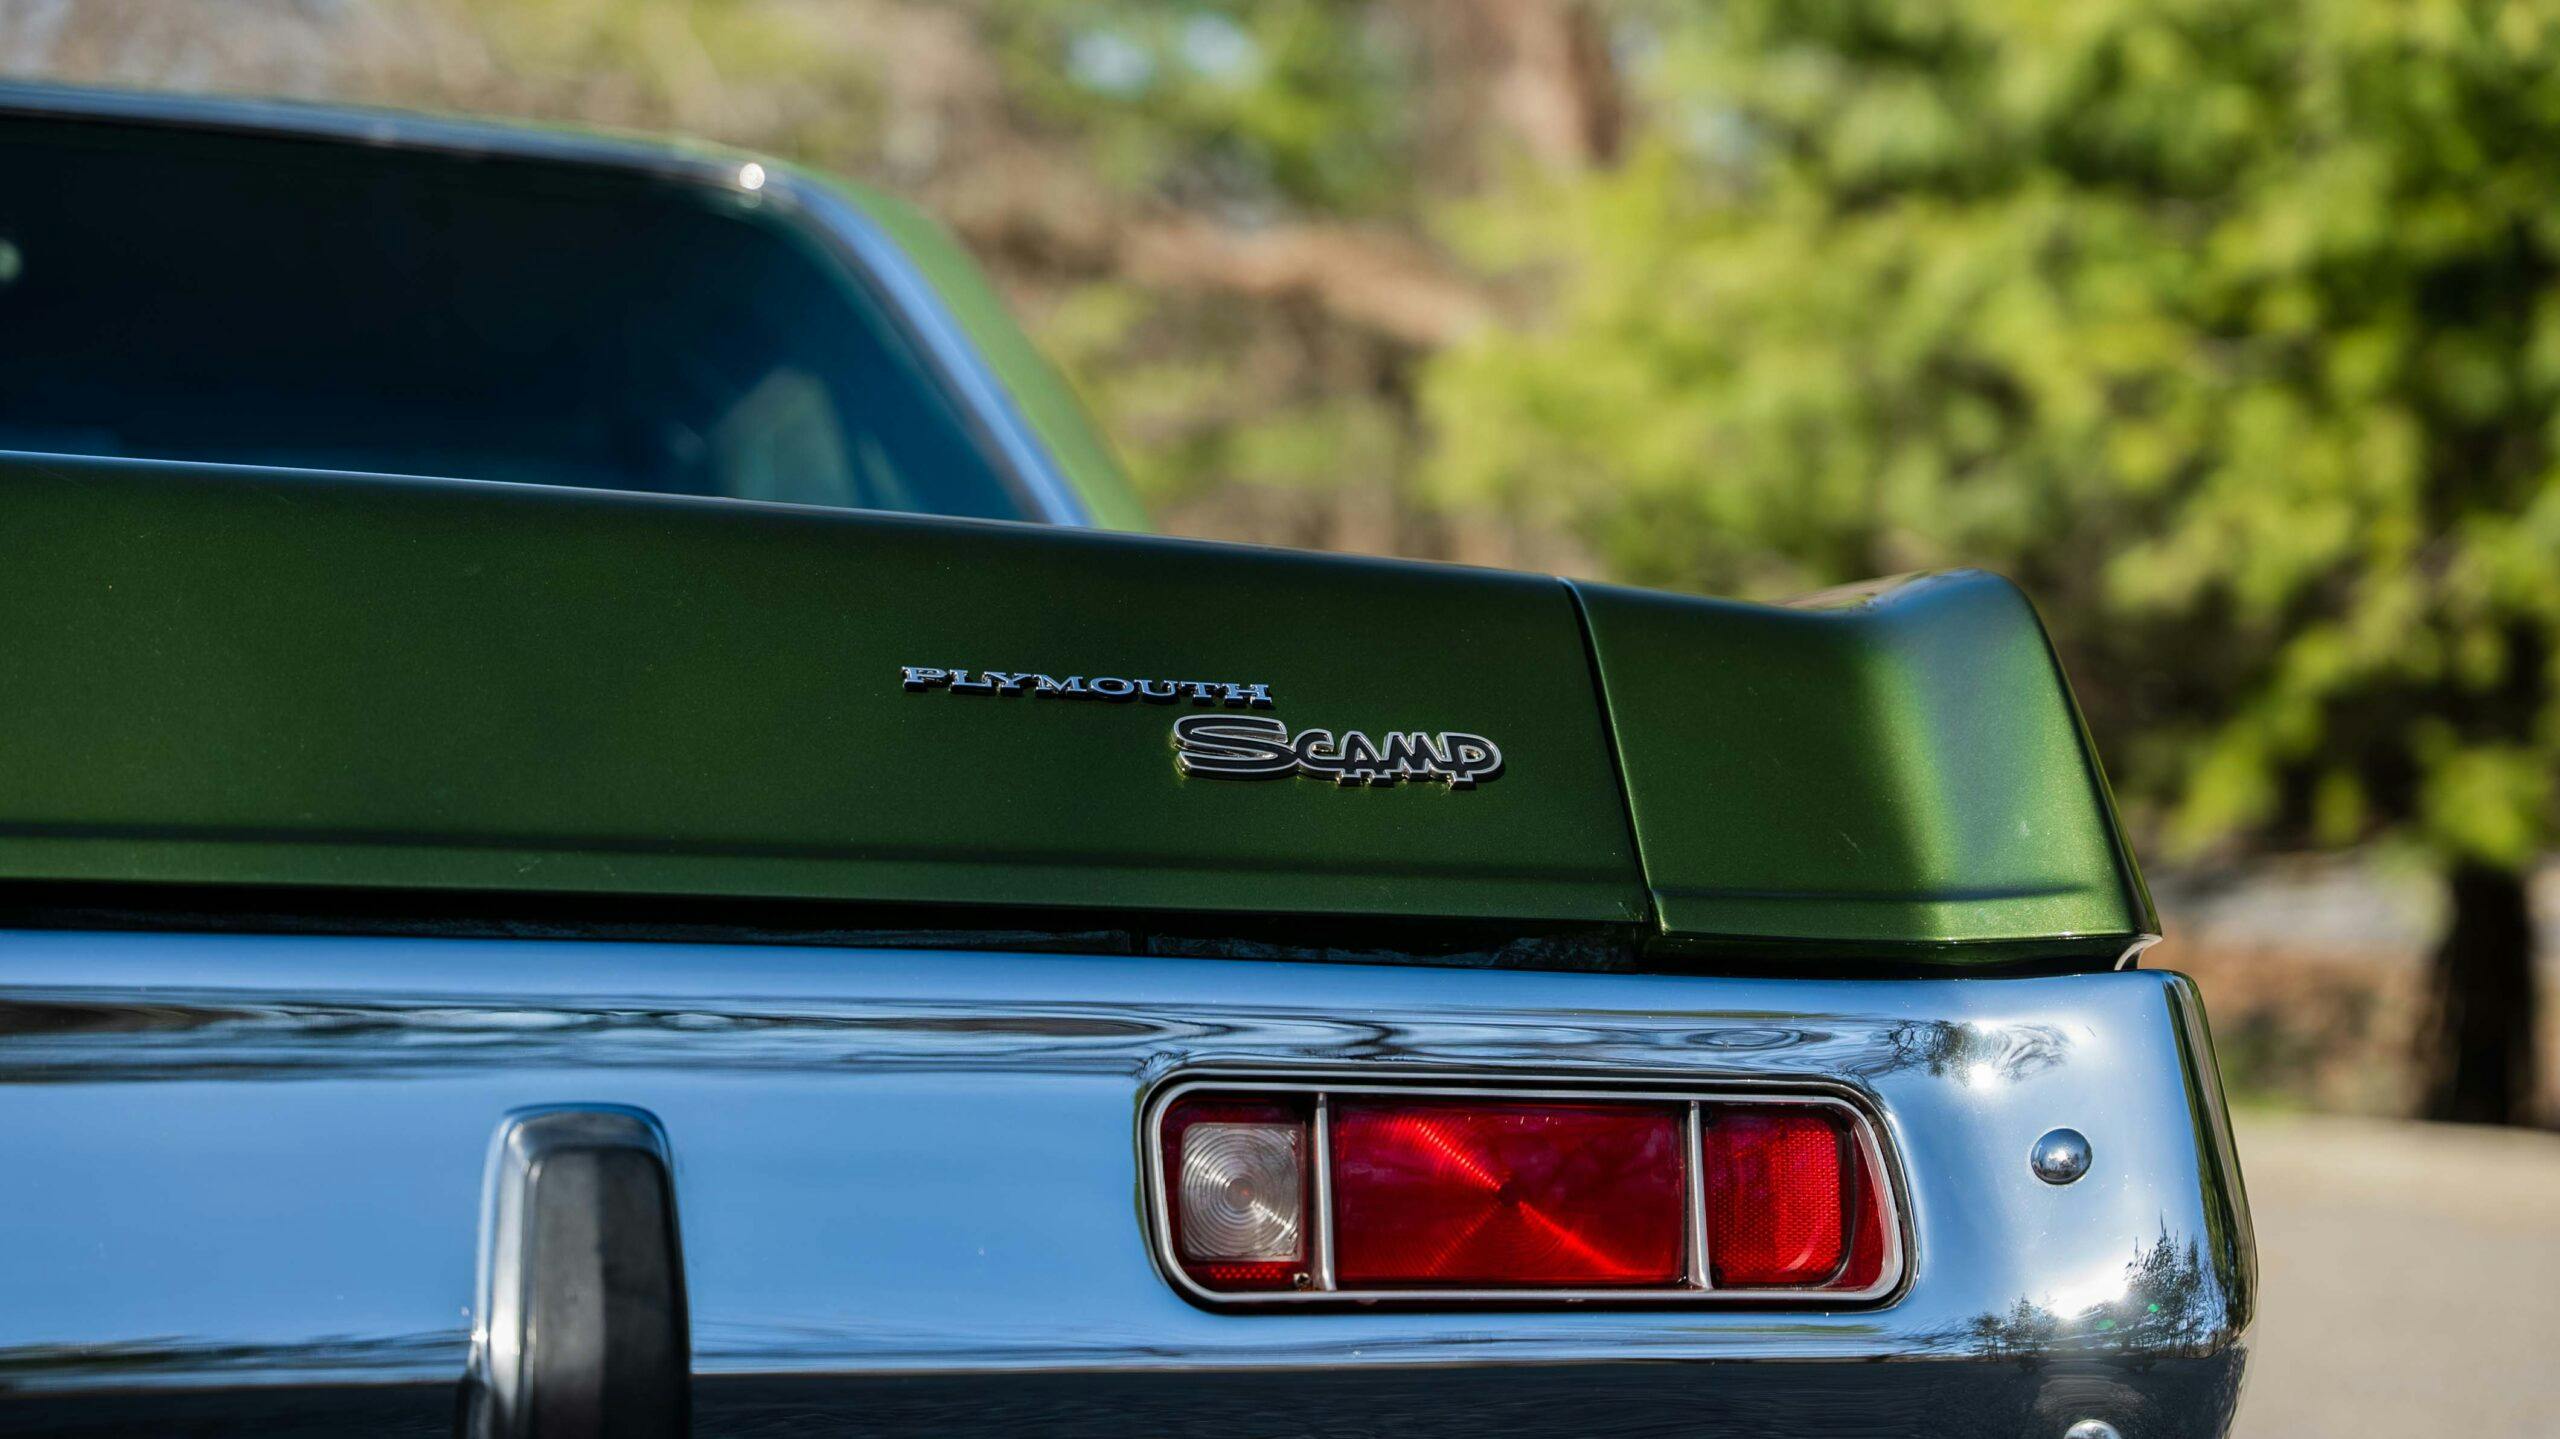 1973 Plymouth Scamp rear badging